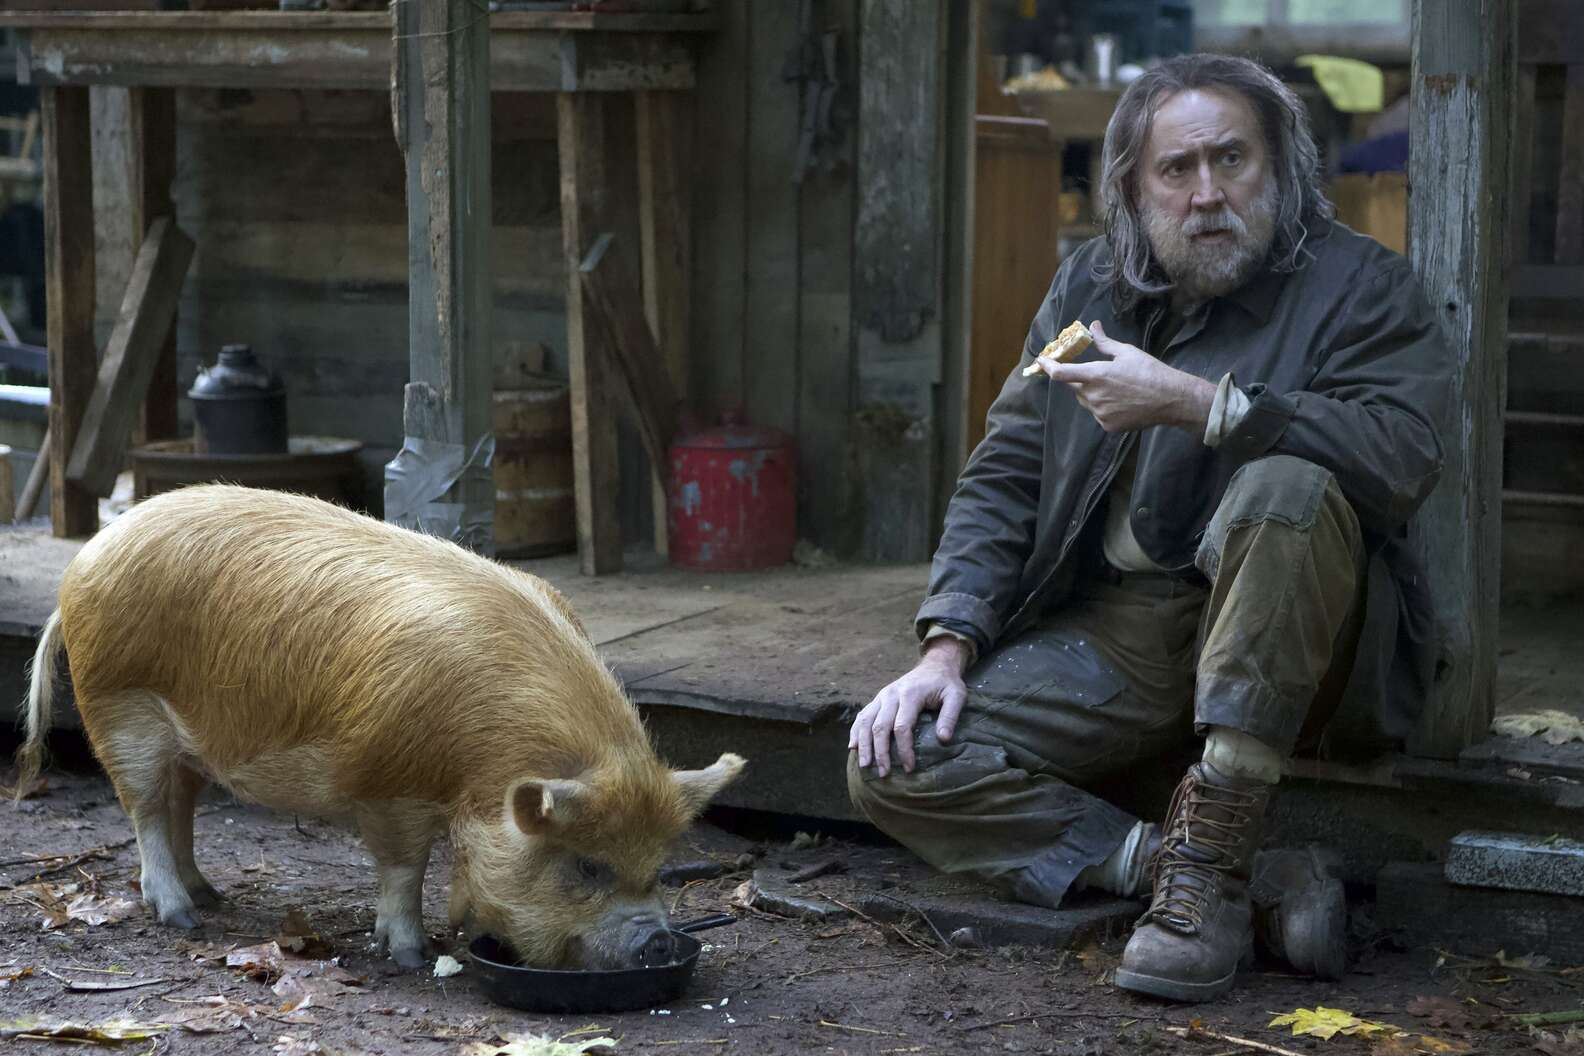 pig movie review guardian